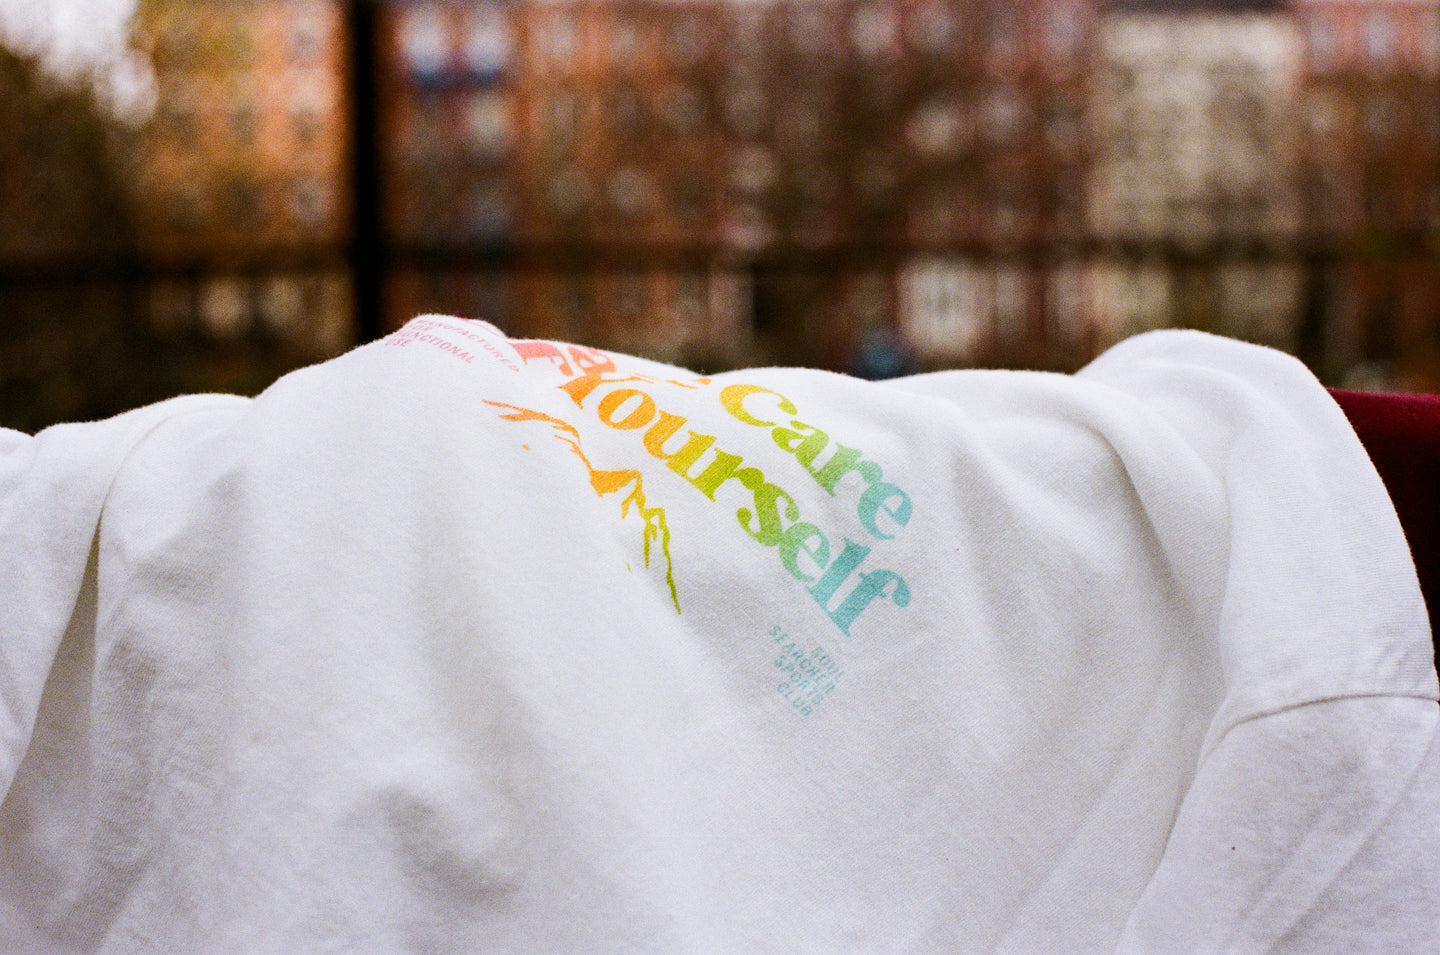 Take Care Of Yourself Garment-Dyed Heavyweight T-Shirt [Berry, Brick, White, Violet, True Navy]